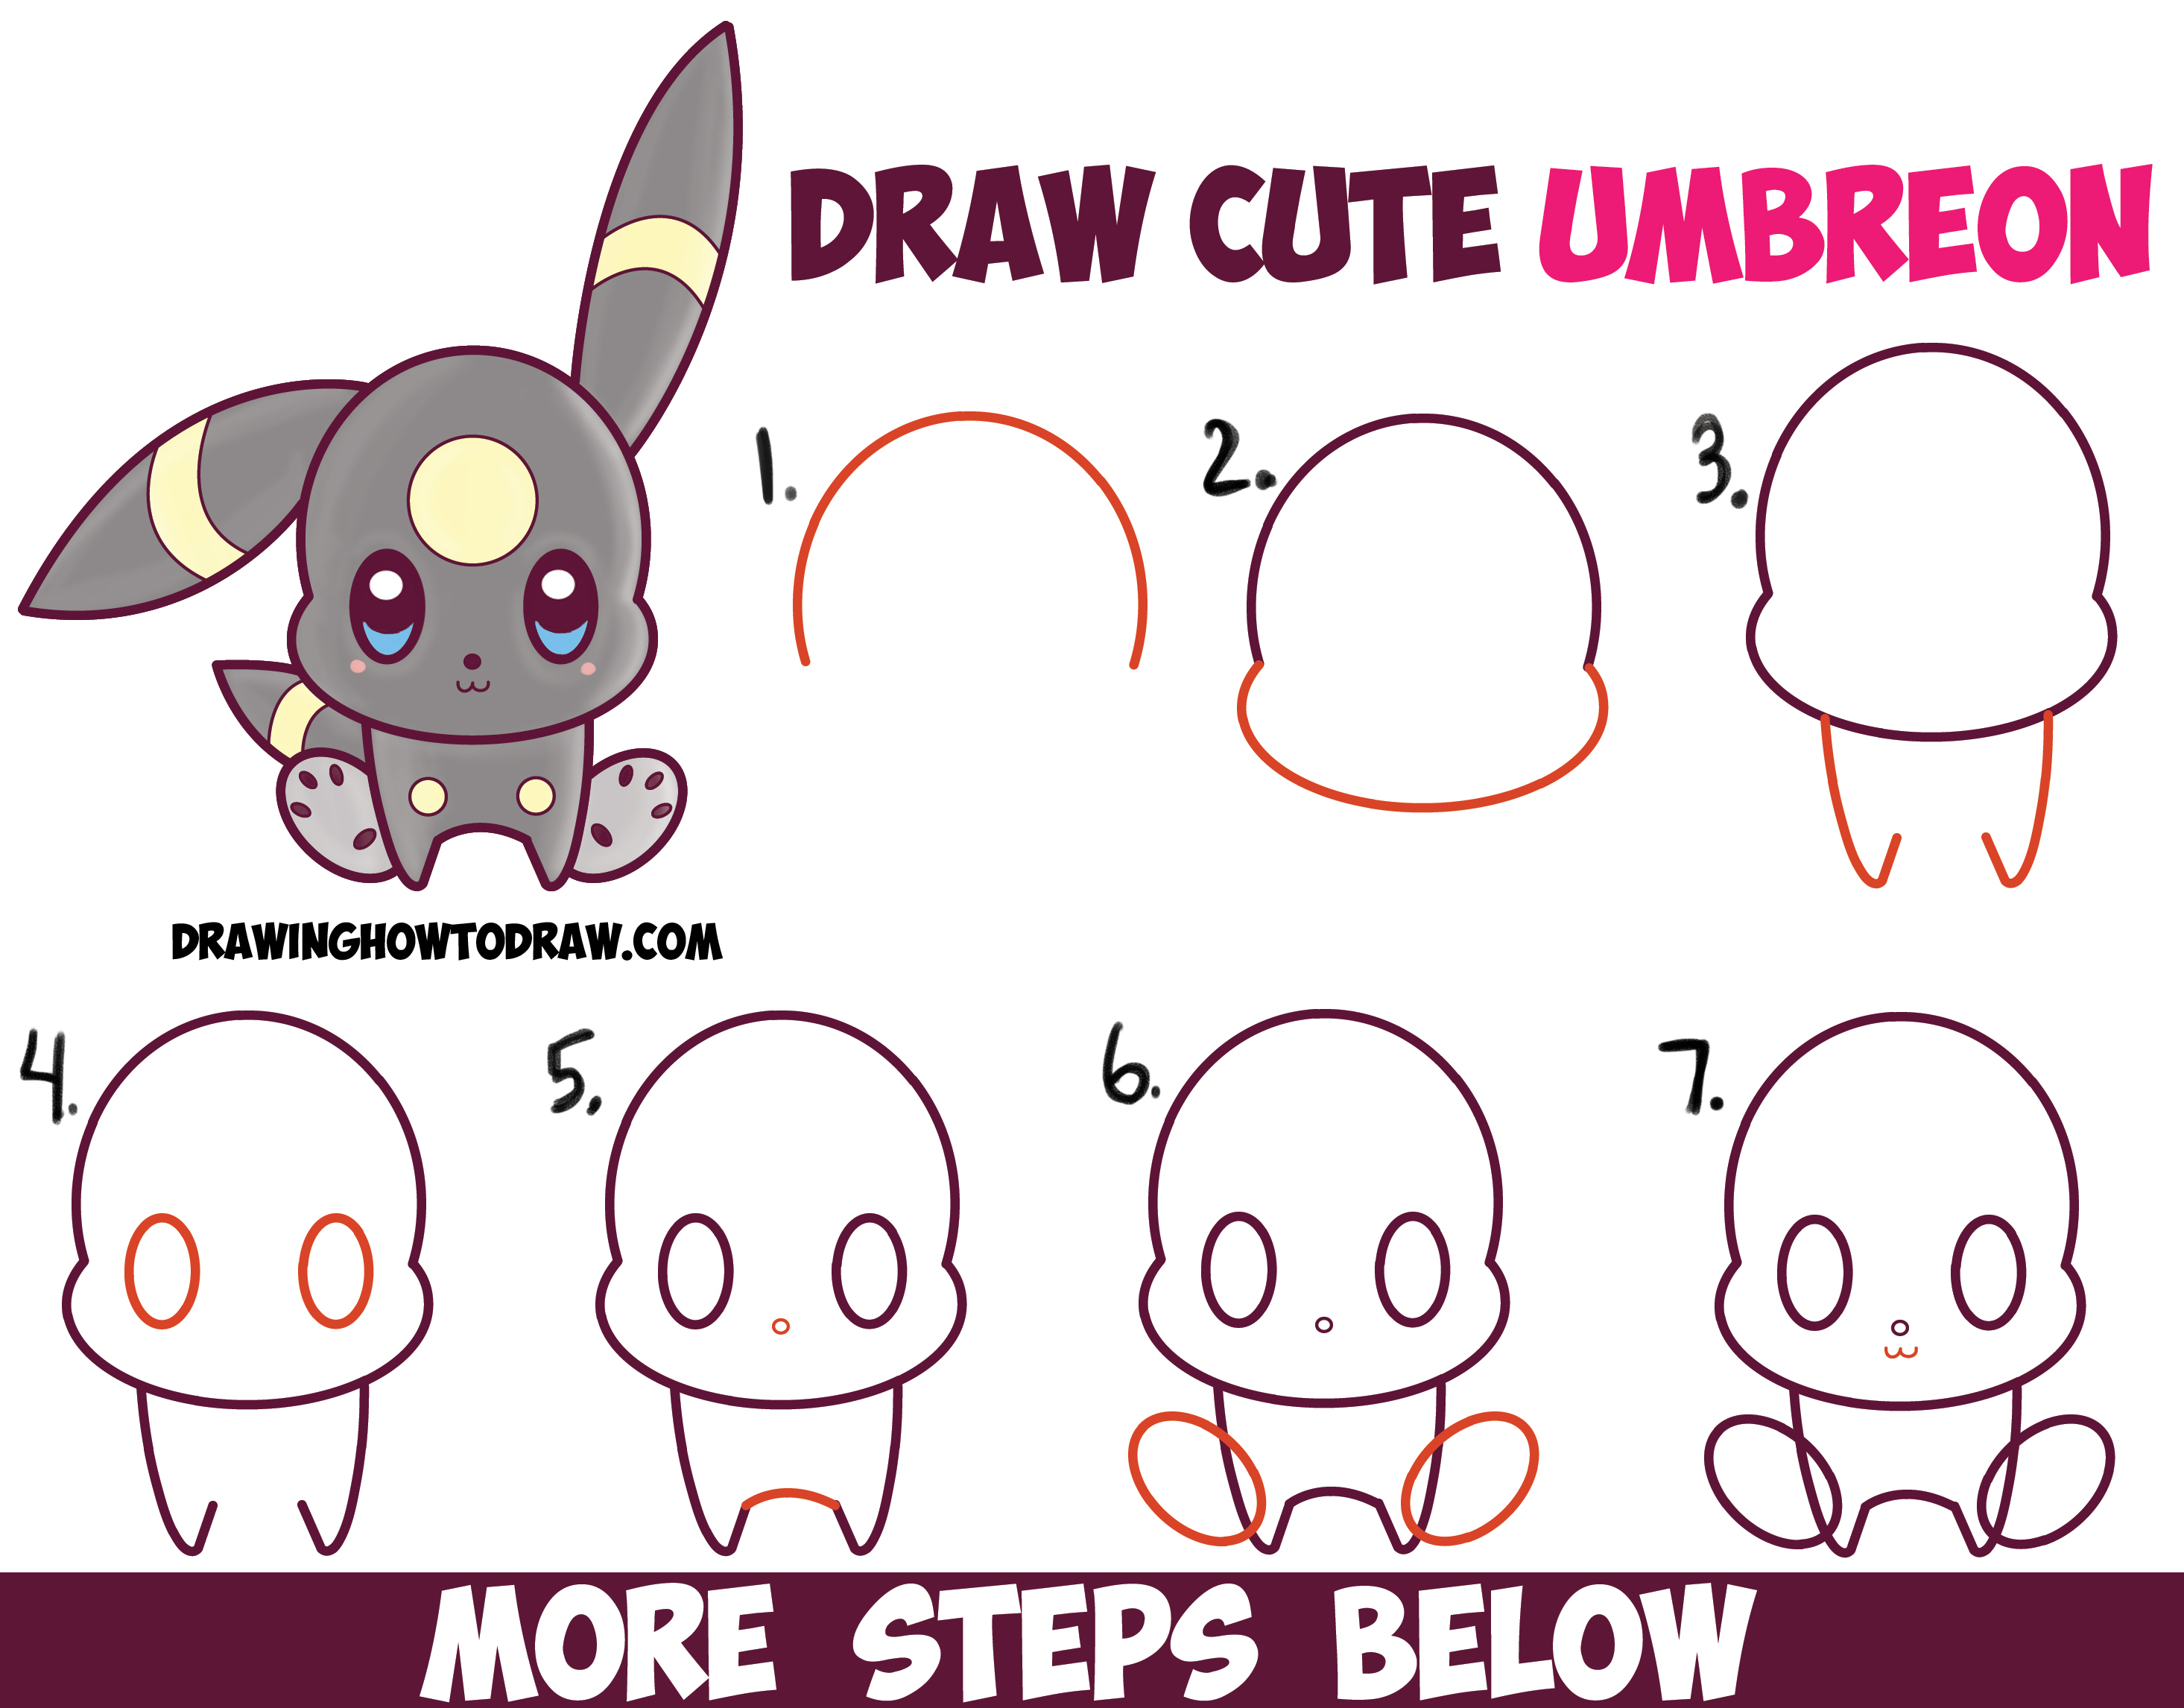 How to Draw Cute Kawaii Chibi Umbreon from Pokemon Easy Step by Step ...